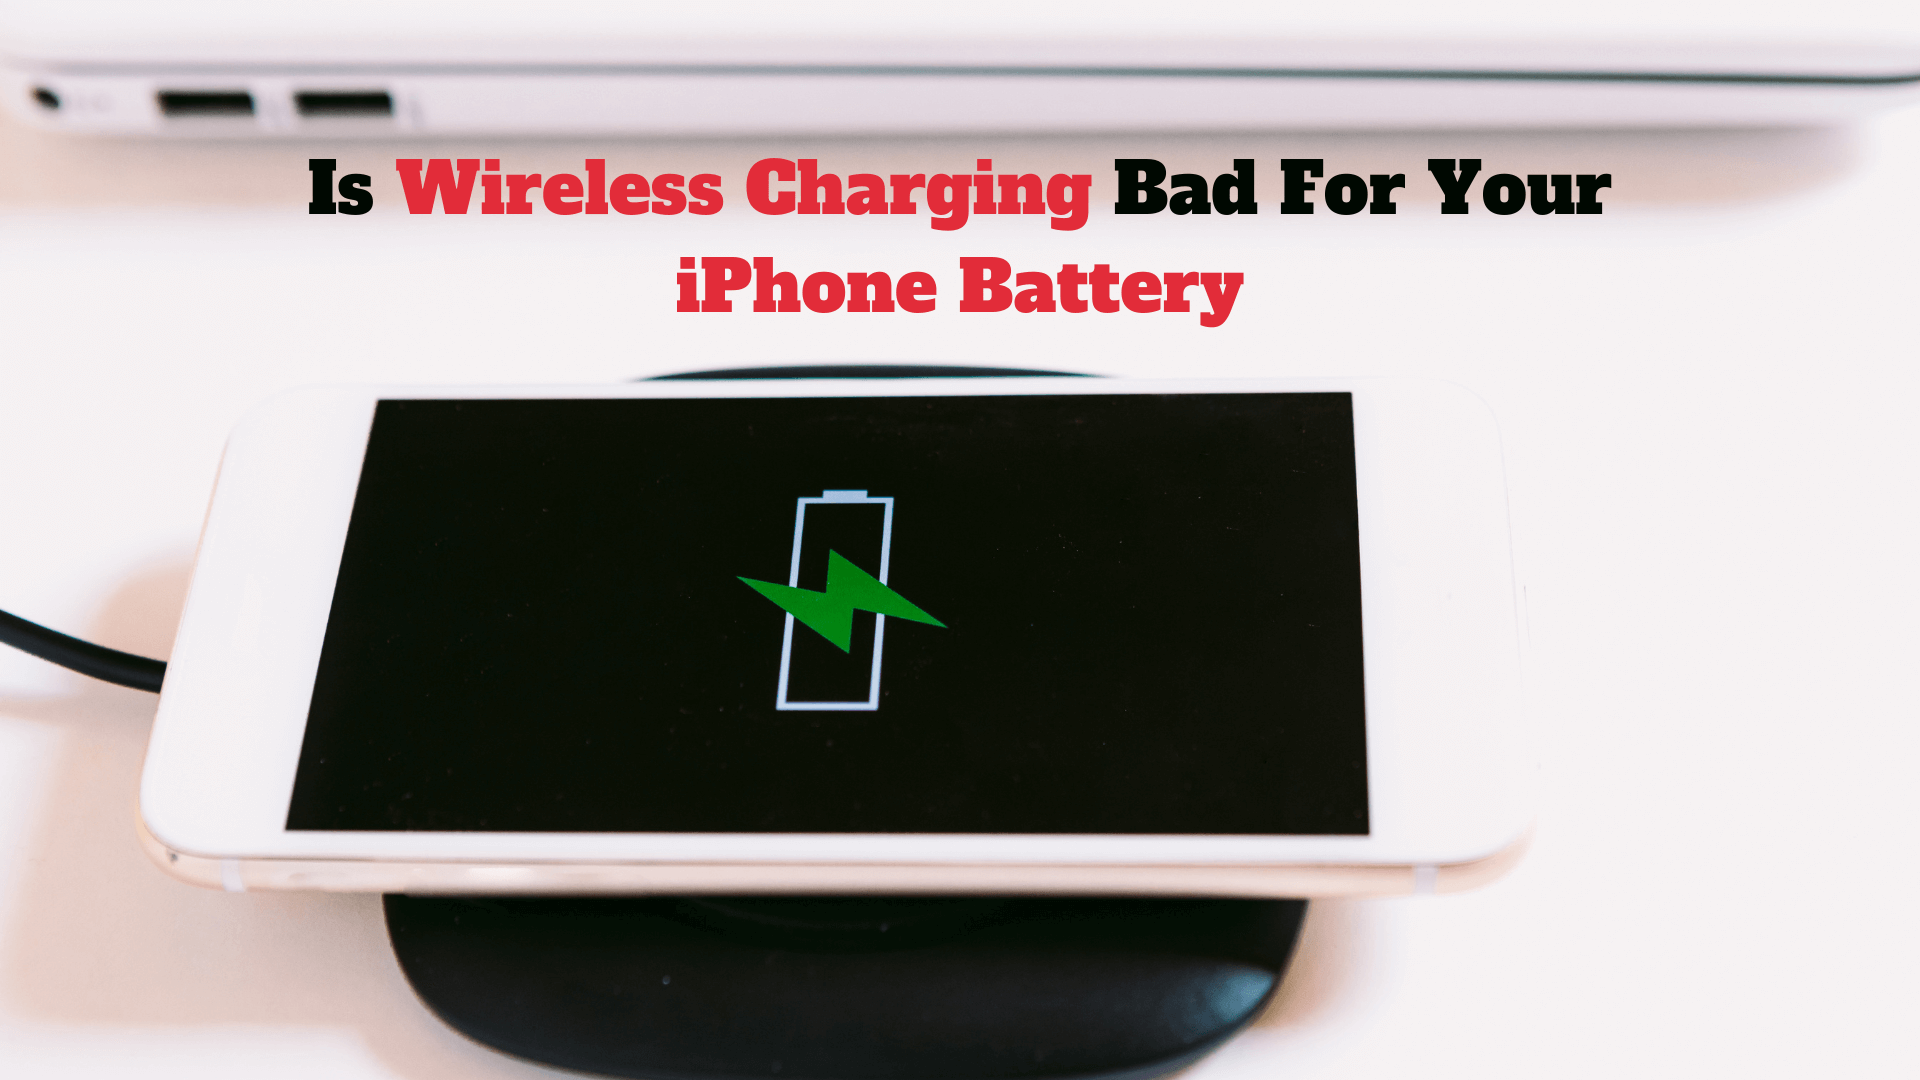 is wireless charging bad for your iPhone battery